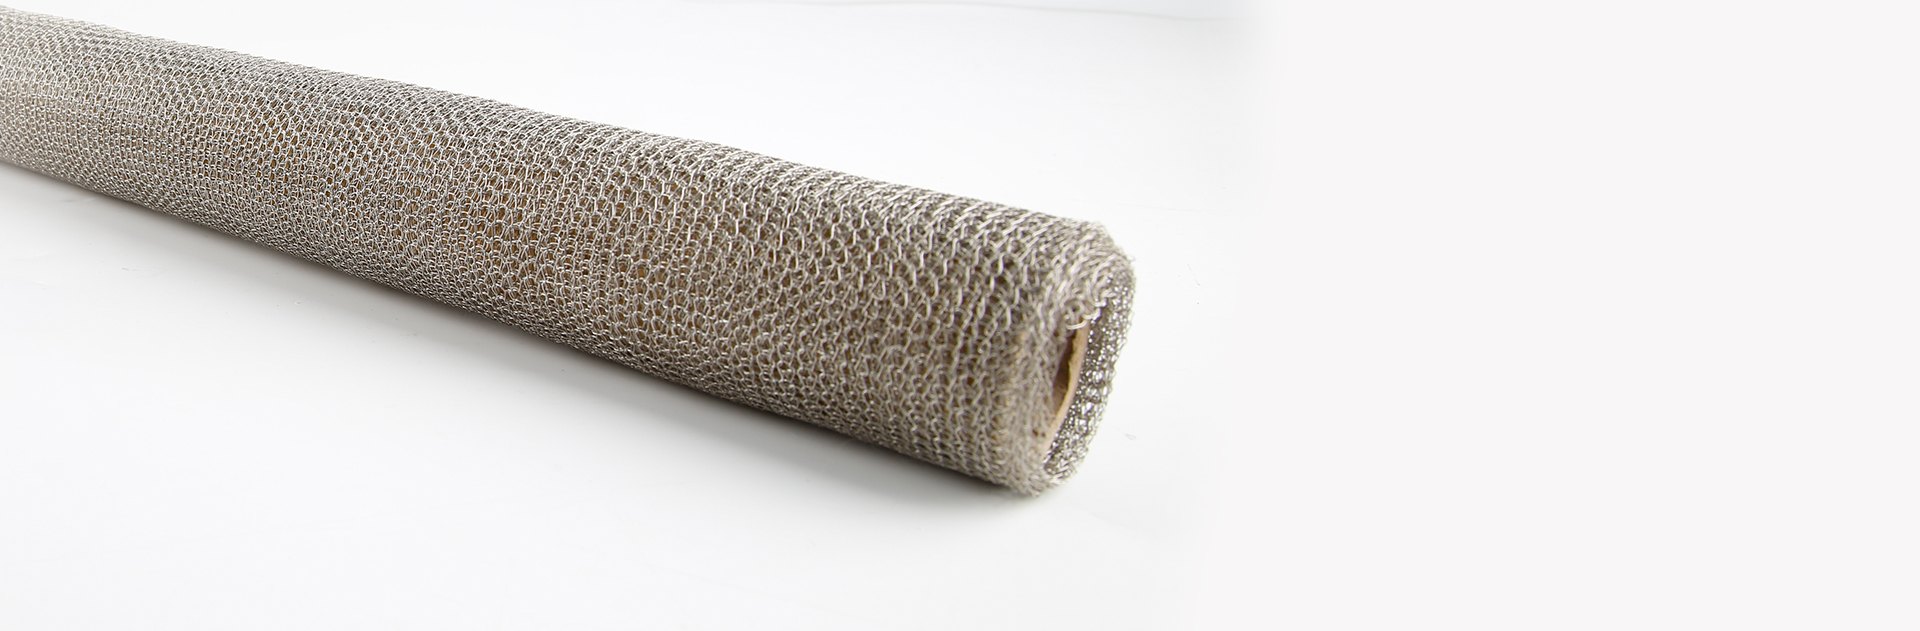 A roll of stainless steel knitted mesh fabric with a metal coin on its stretching part is on the floor.